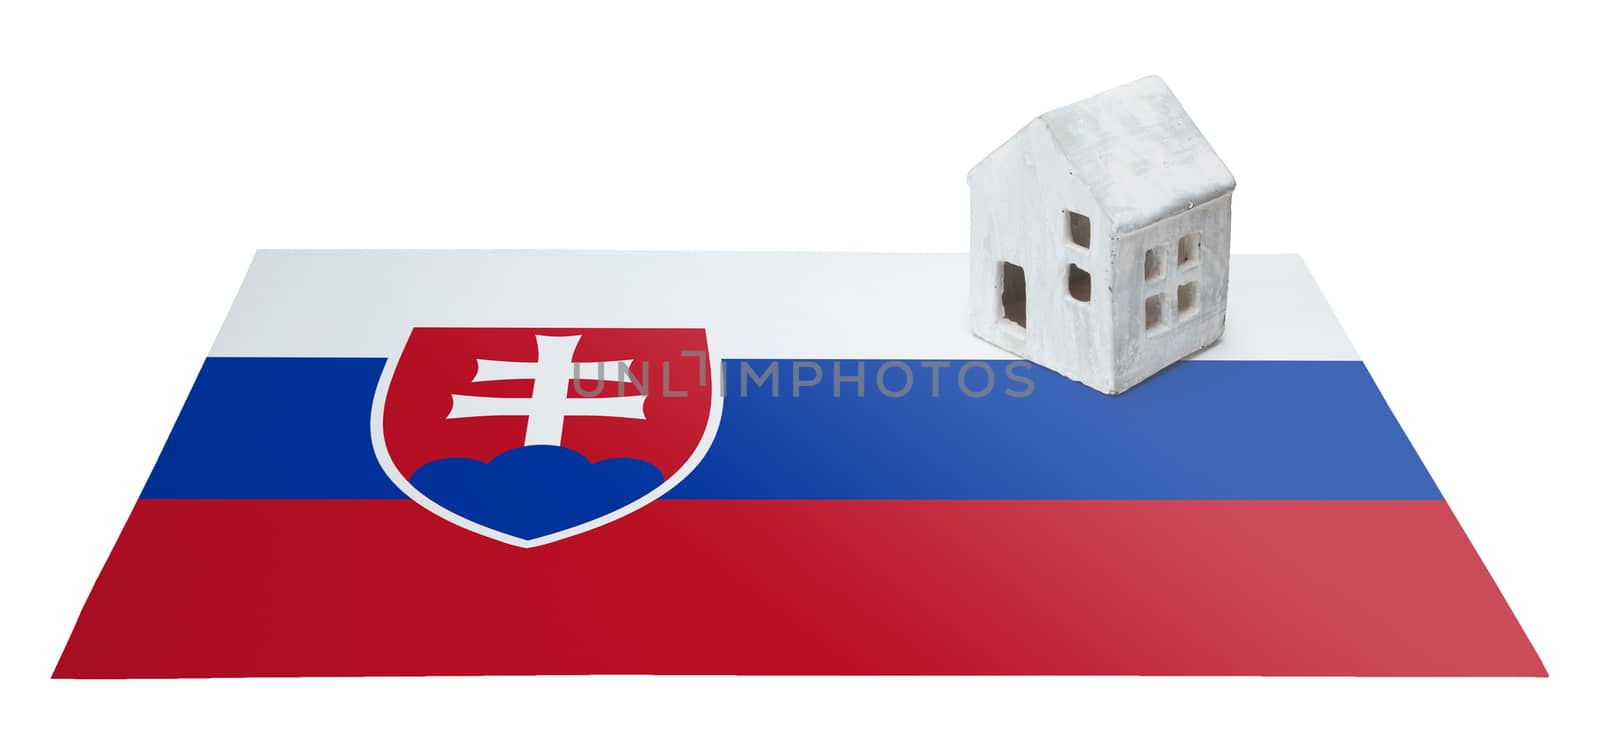 Small house on a flag - Slovakia by michaklootwijk